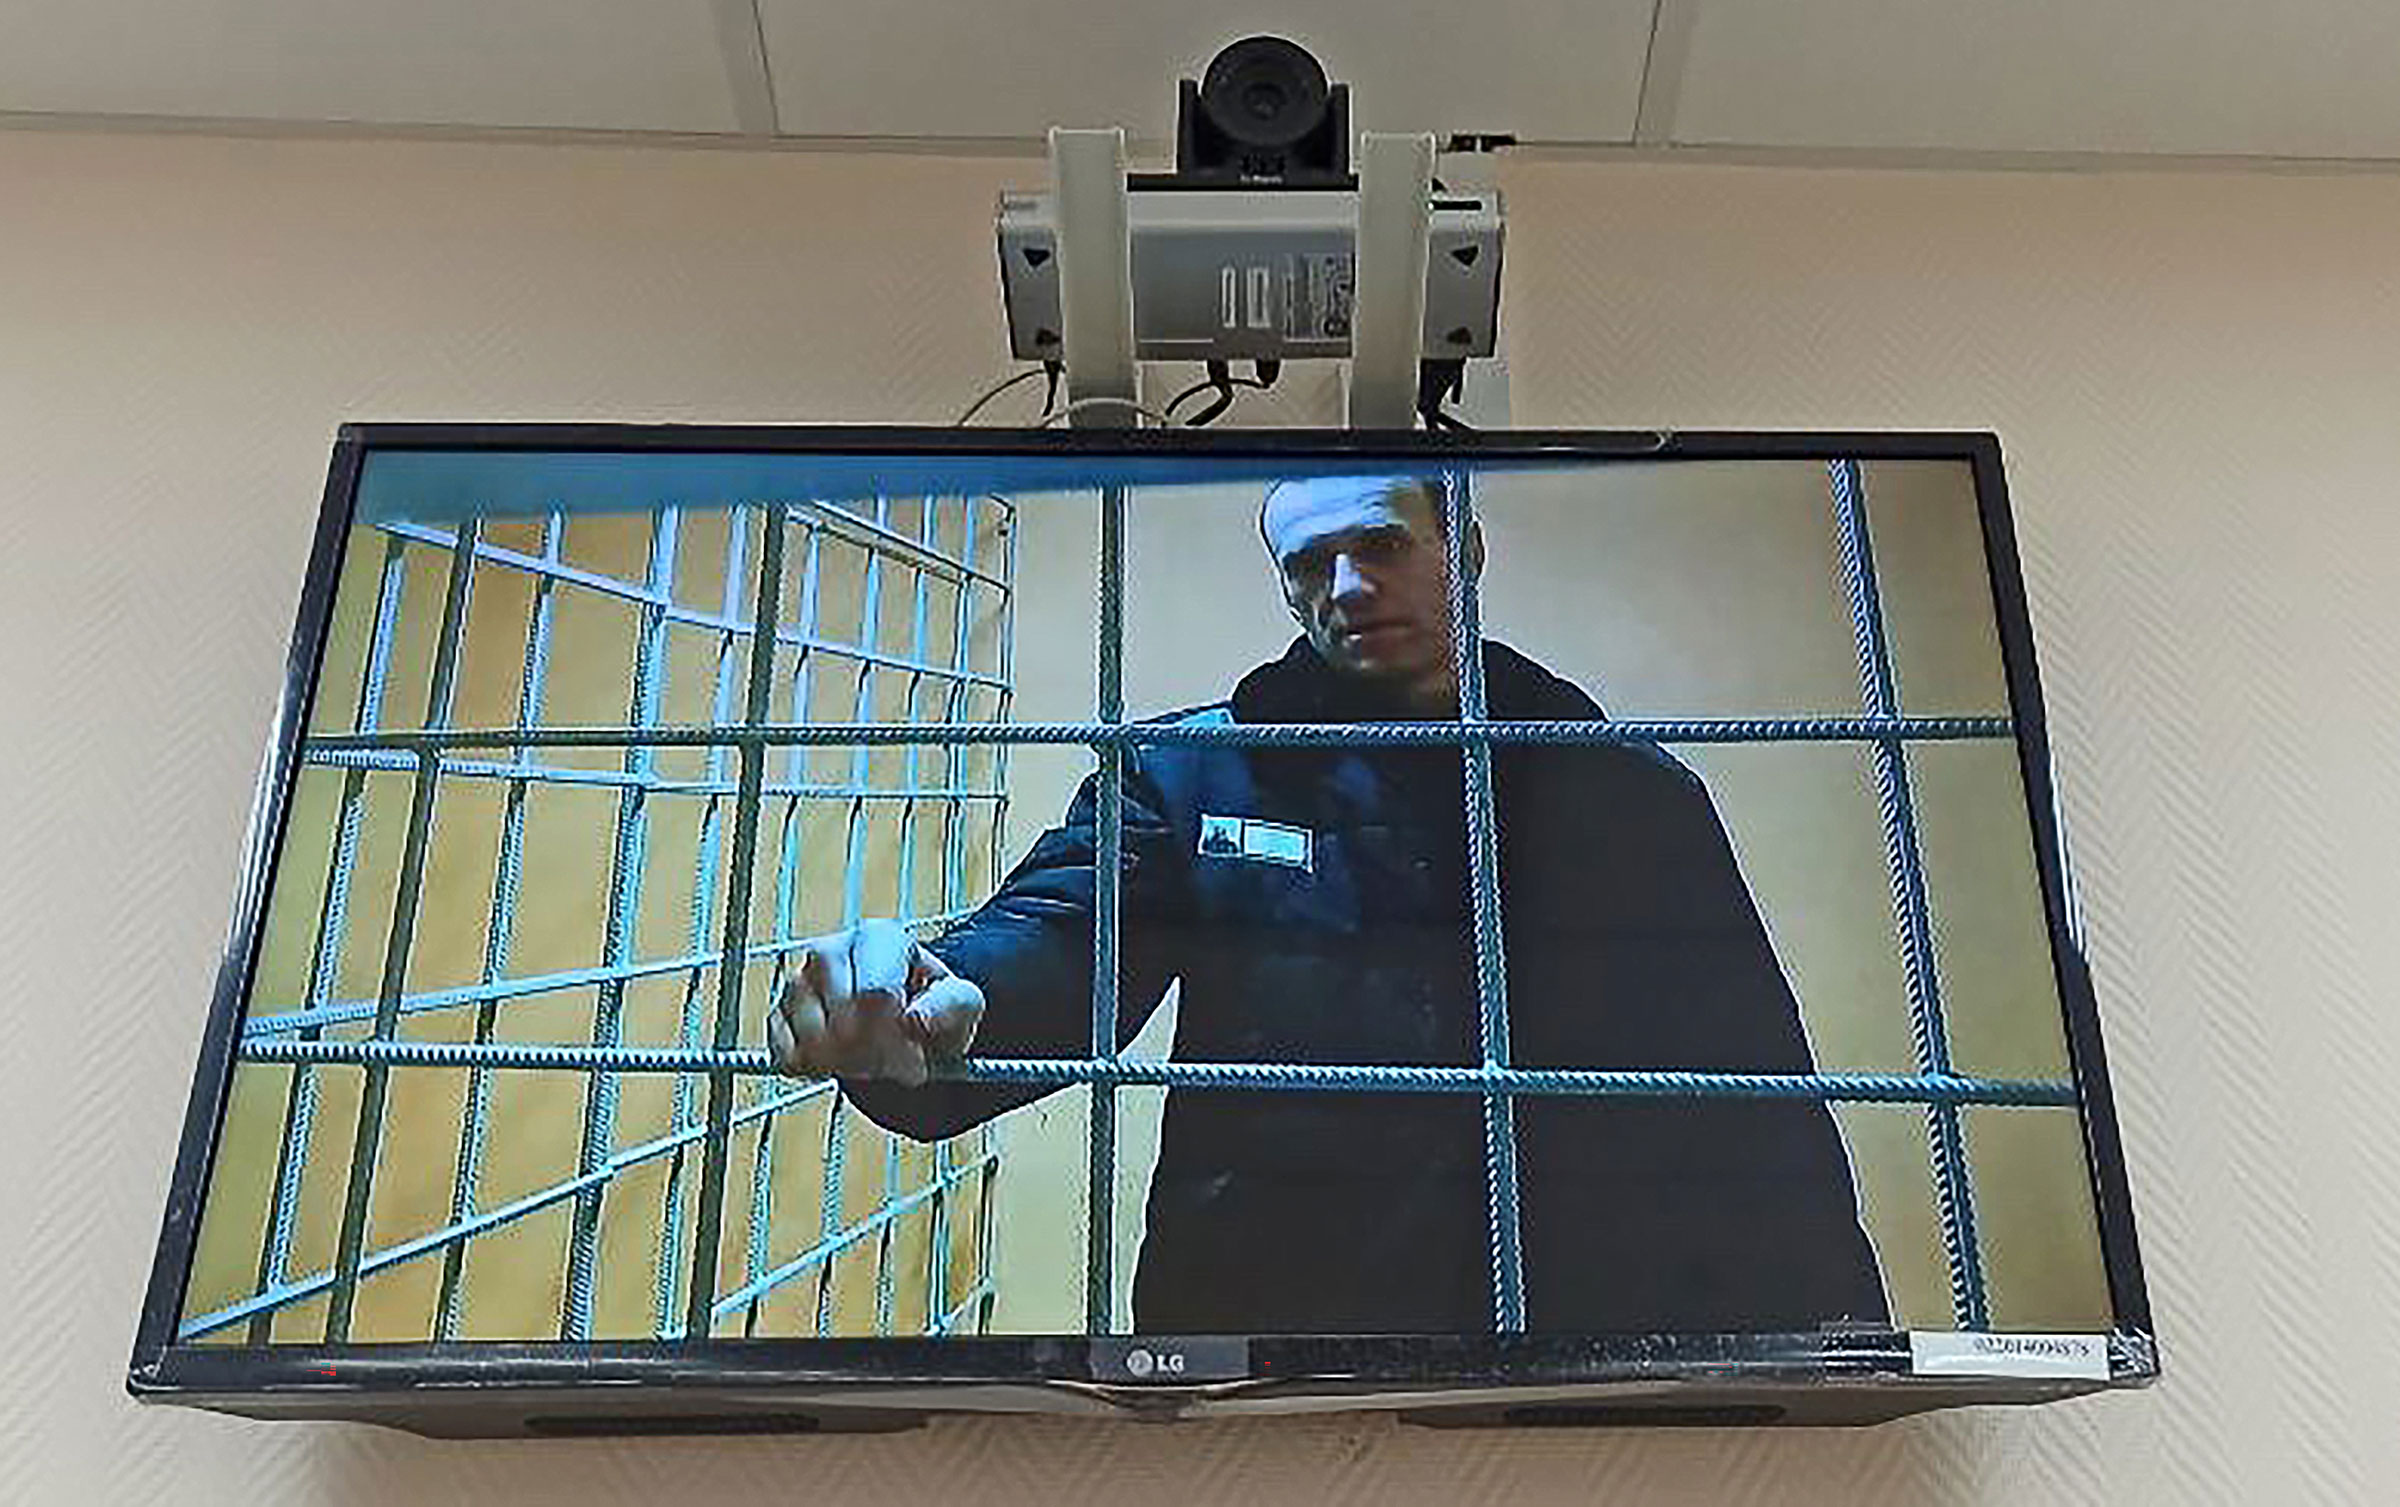 Russian opposition activist Alexei Navalny is seen on the screen during a hearing at the Petushki District Court on January 17, 2022. (Anna Ustinova—TASS/Getty Images)